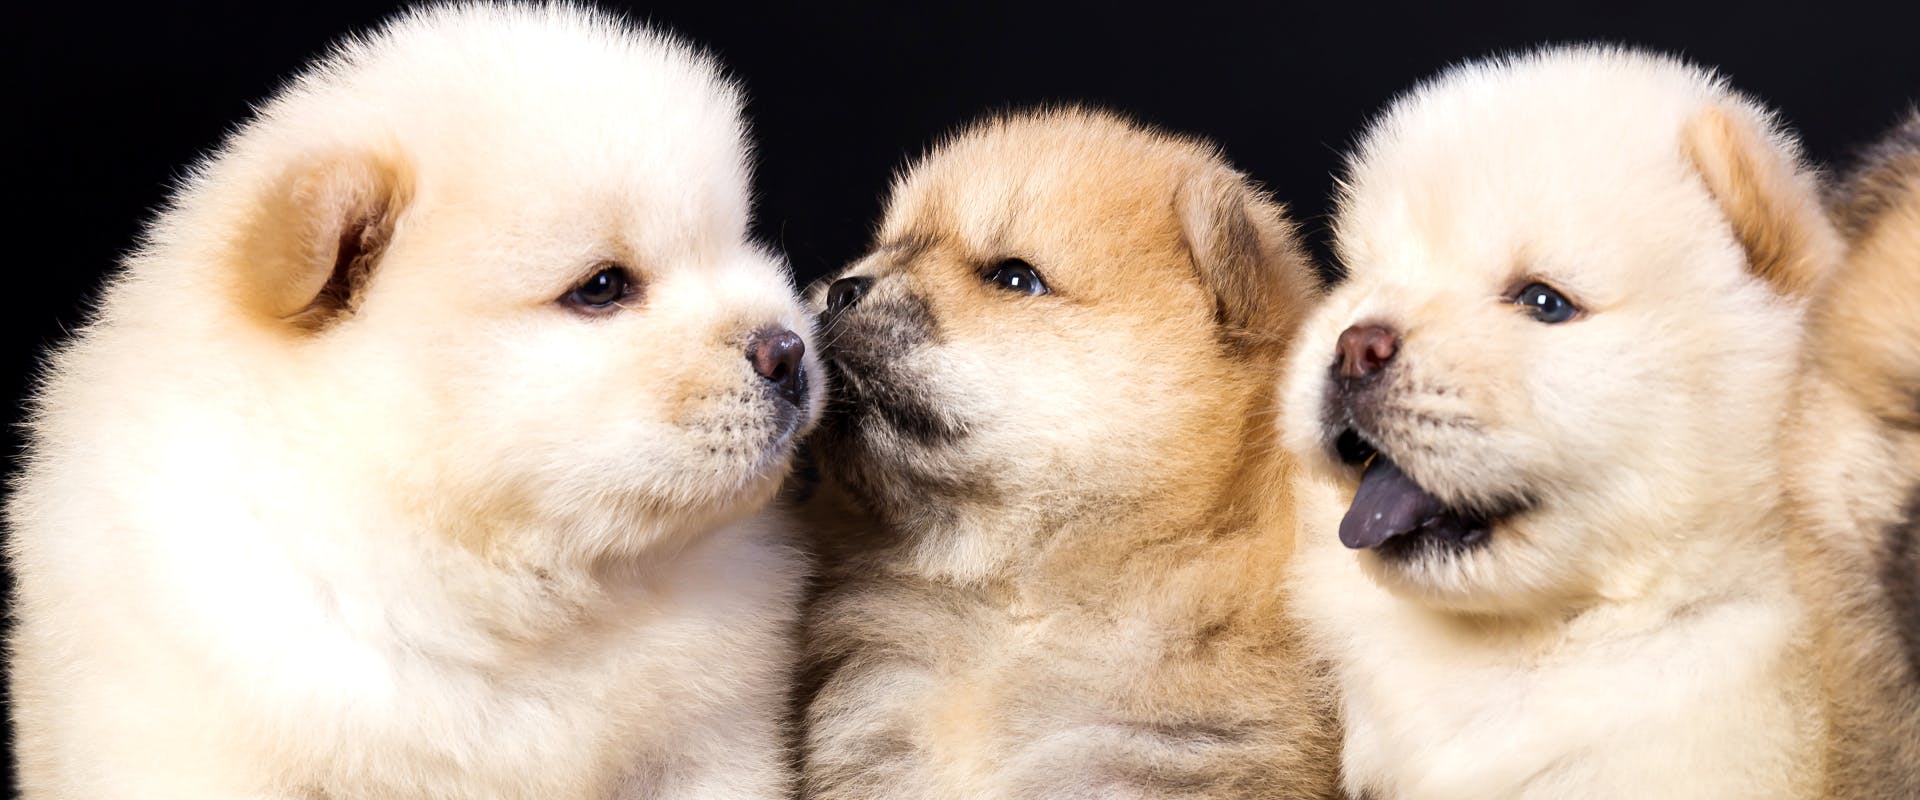 a pack of chow chow puppies sat next to each other with a black background